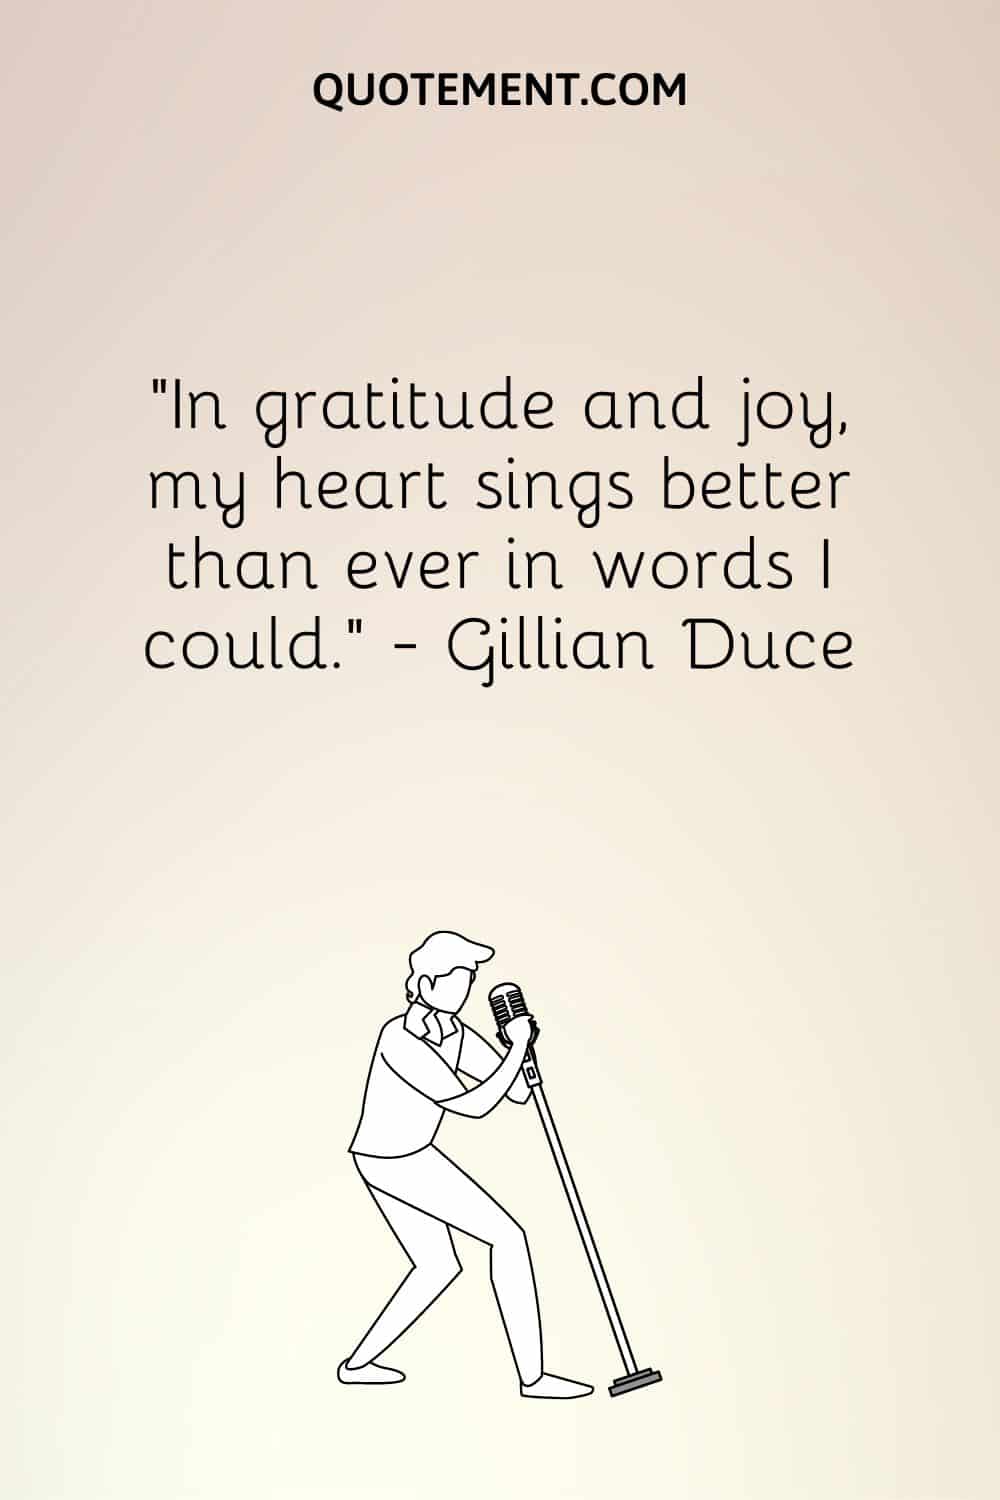 “In gratitude and joy, my heart sings better than ever in words I could.” ― Gillian Duce